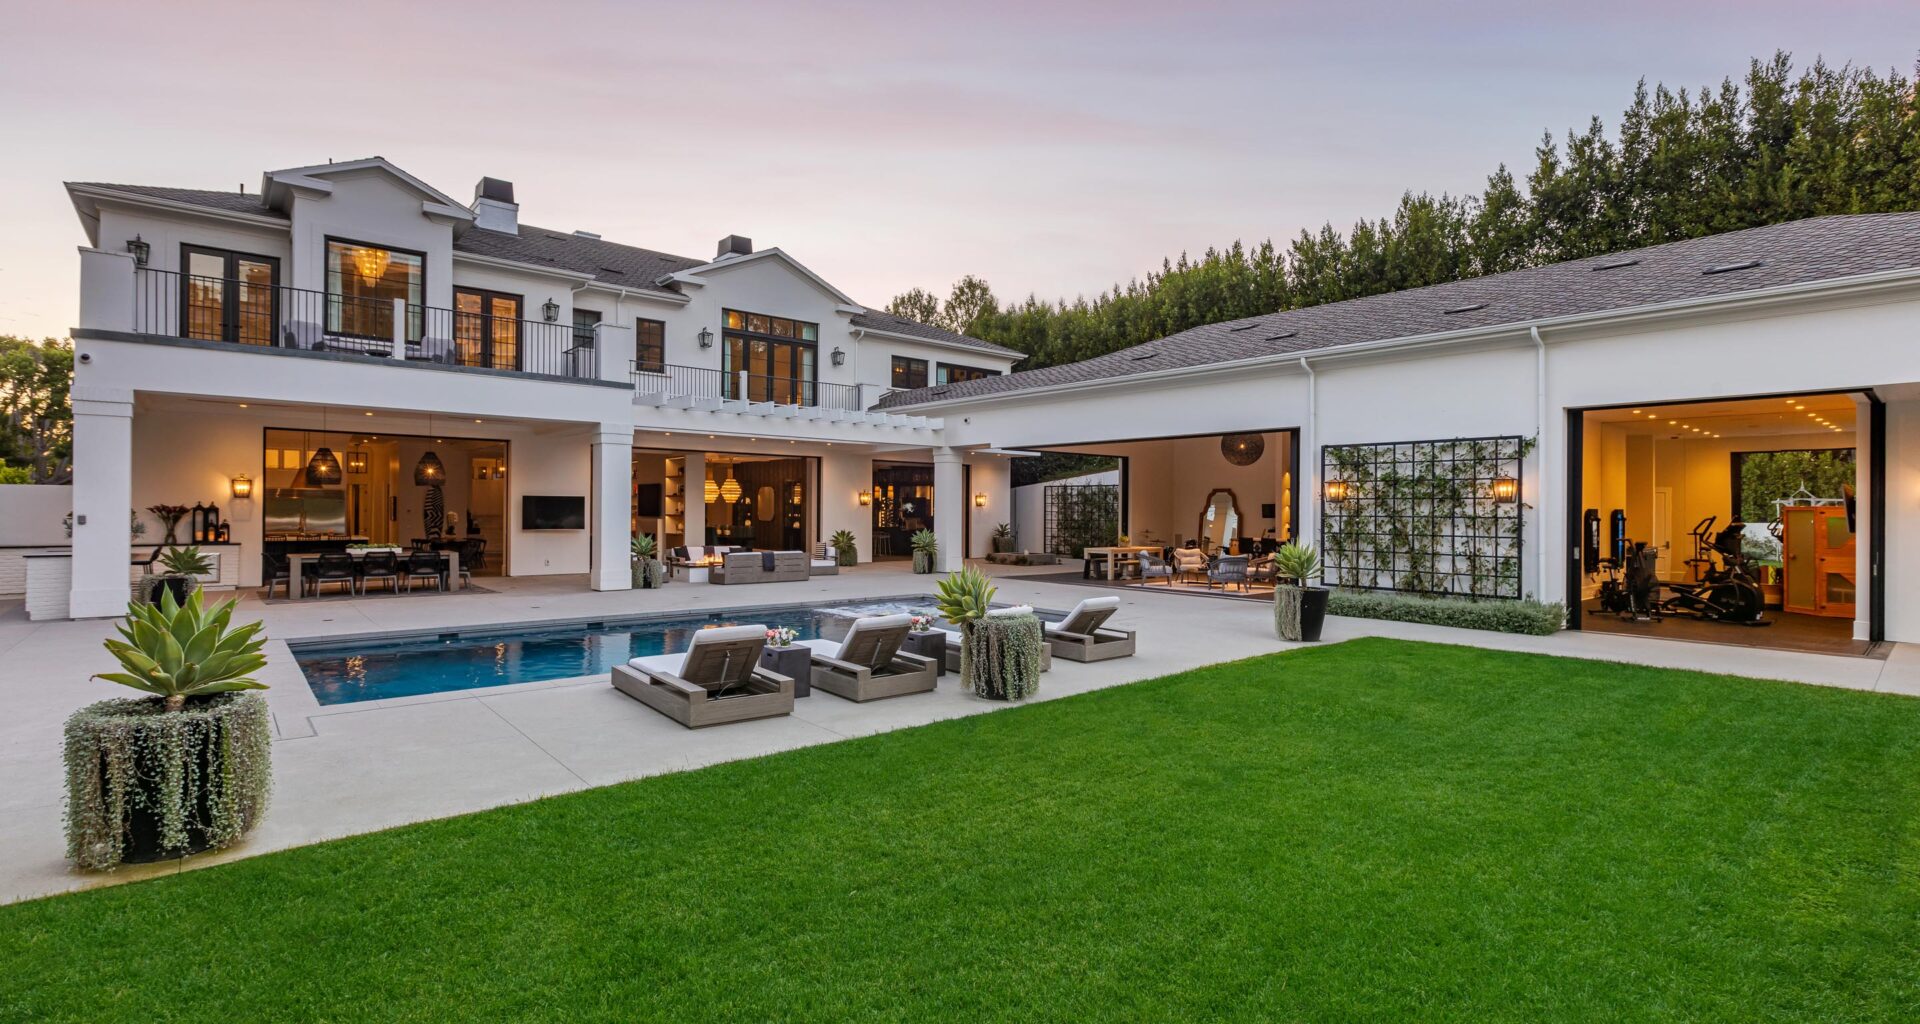 Tony Gonzalez, NFL, Tight End, Home, House, Estate,807 Cinthia Street, Beverly Hills, West Hollywood